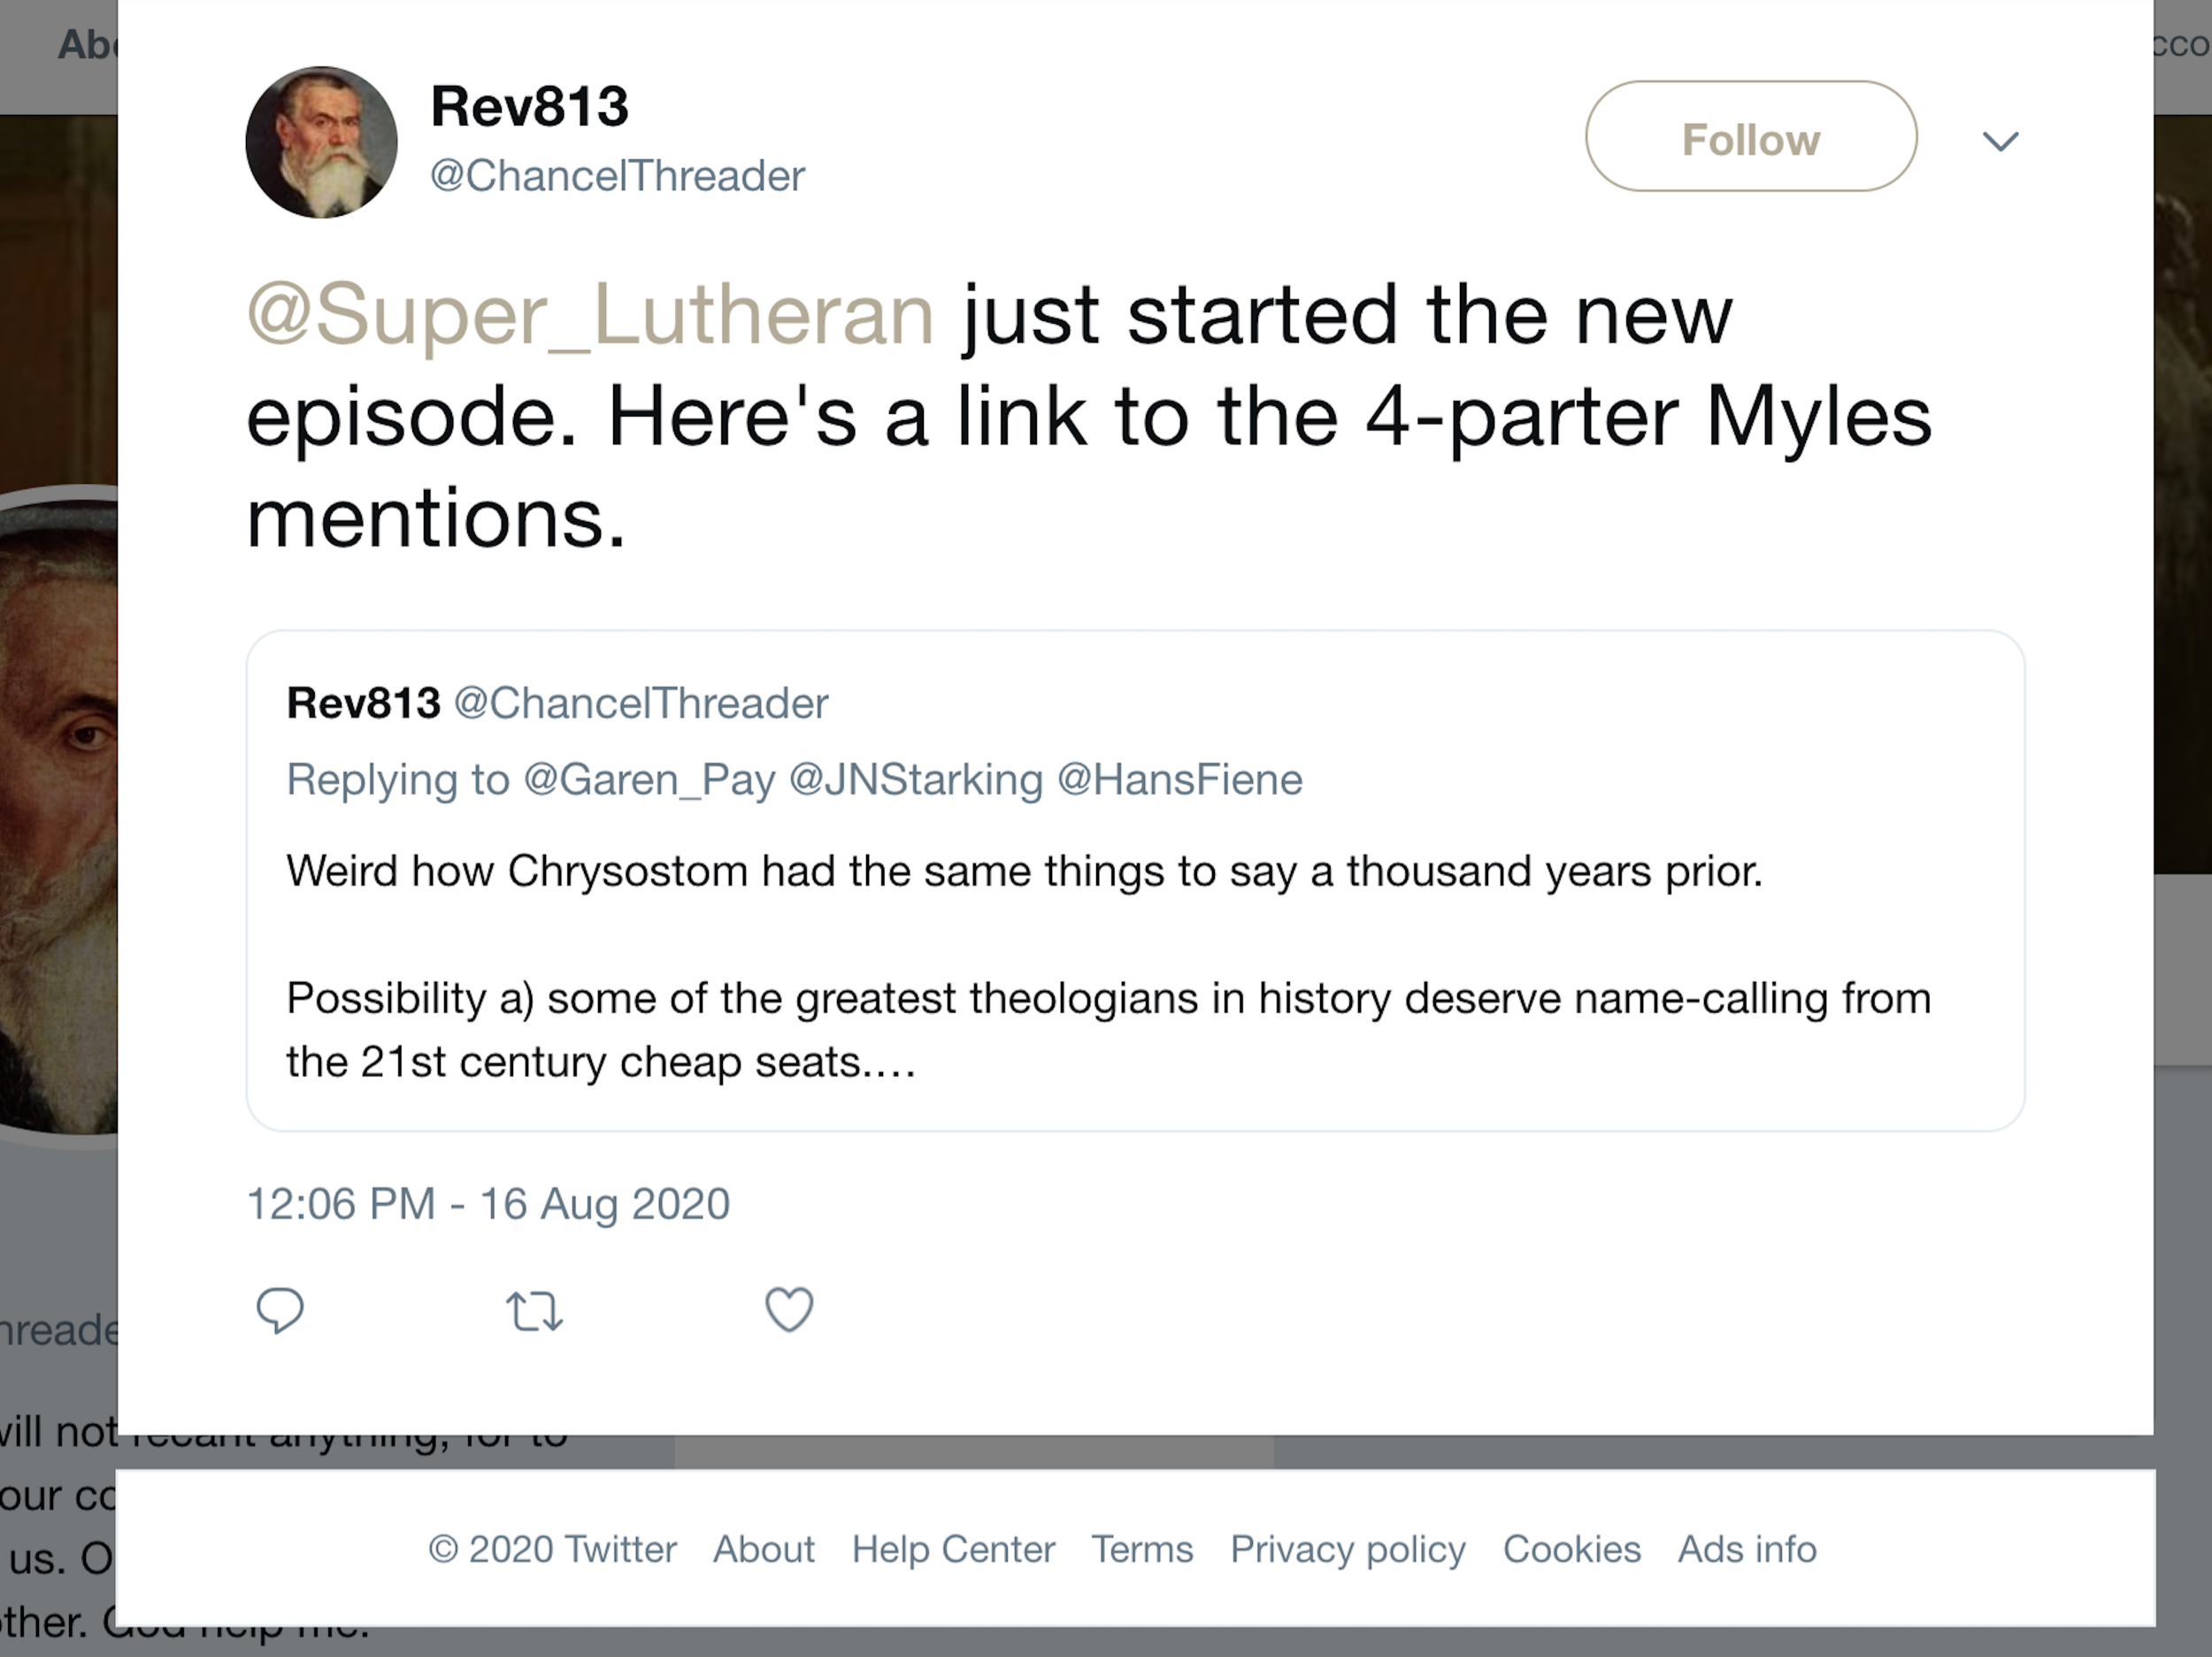 Woe as Chancelthreader linking to Superlutheran’s Godcast: "@Super_Lutheran just started the new episode. Here's a link to the new 4-parter Myles mentions." QT's his own tweet which reads, 'Weird how Chrysostom had the same things to say a thousand years prior. Possibility a) some of the greatest theologians in history deserve name-calling from the 21st century cheap seats..." Rest of tweet not visible. Dated 12:06 pm, 16 Aug 2020.